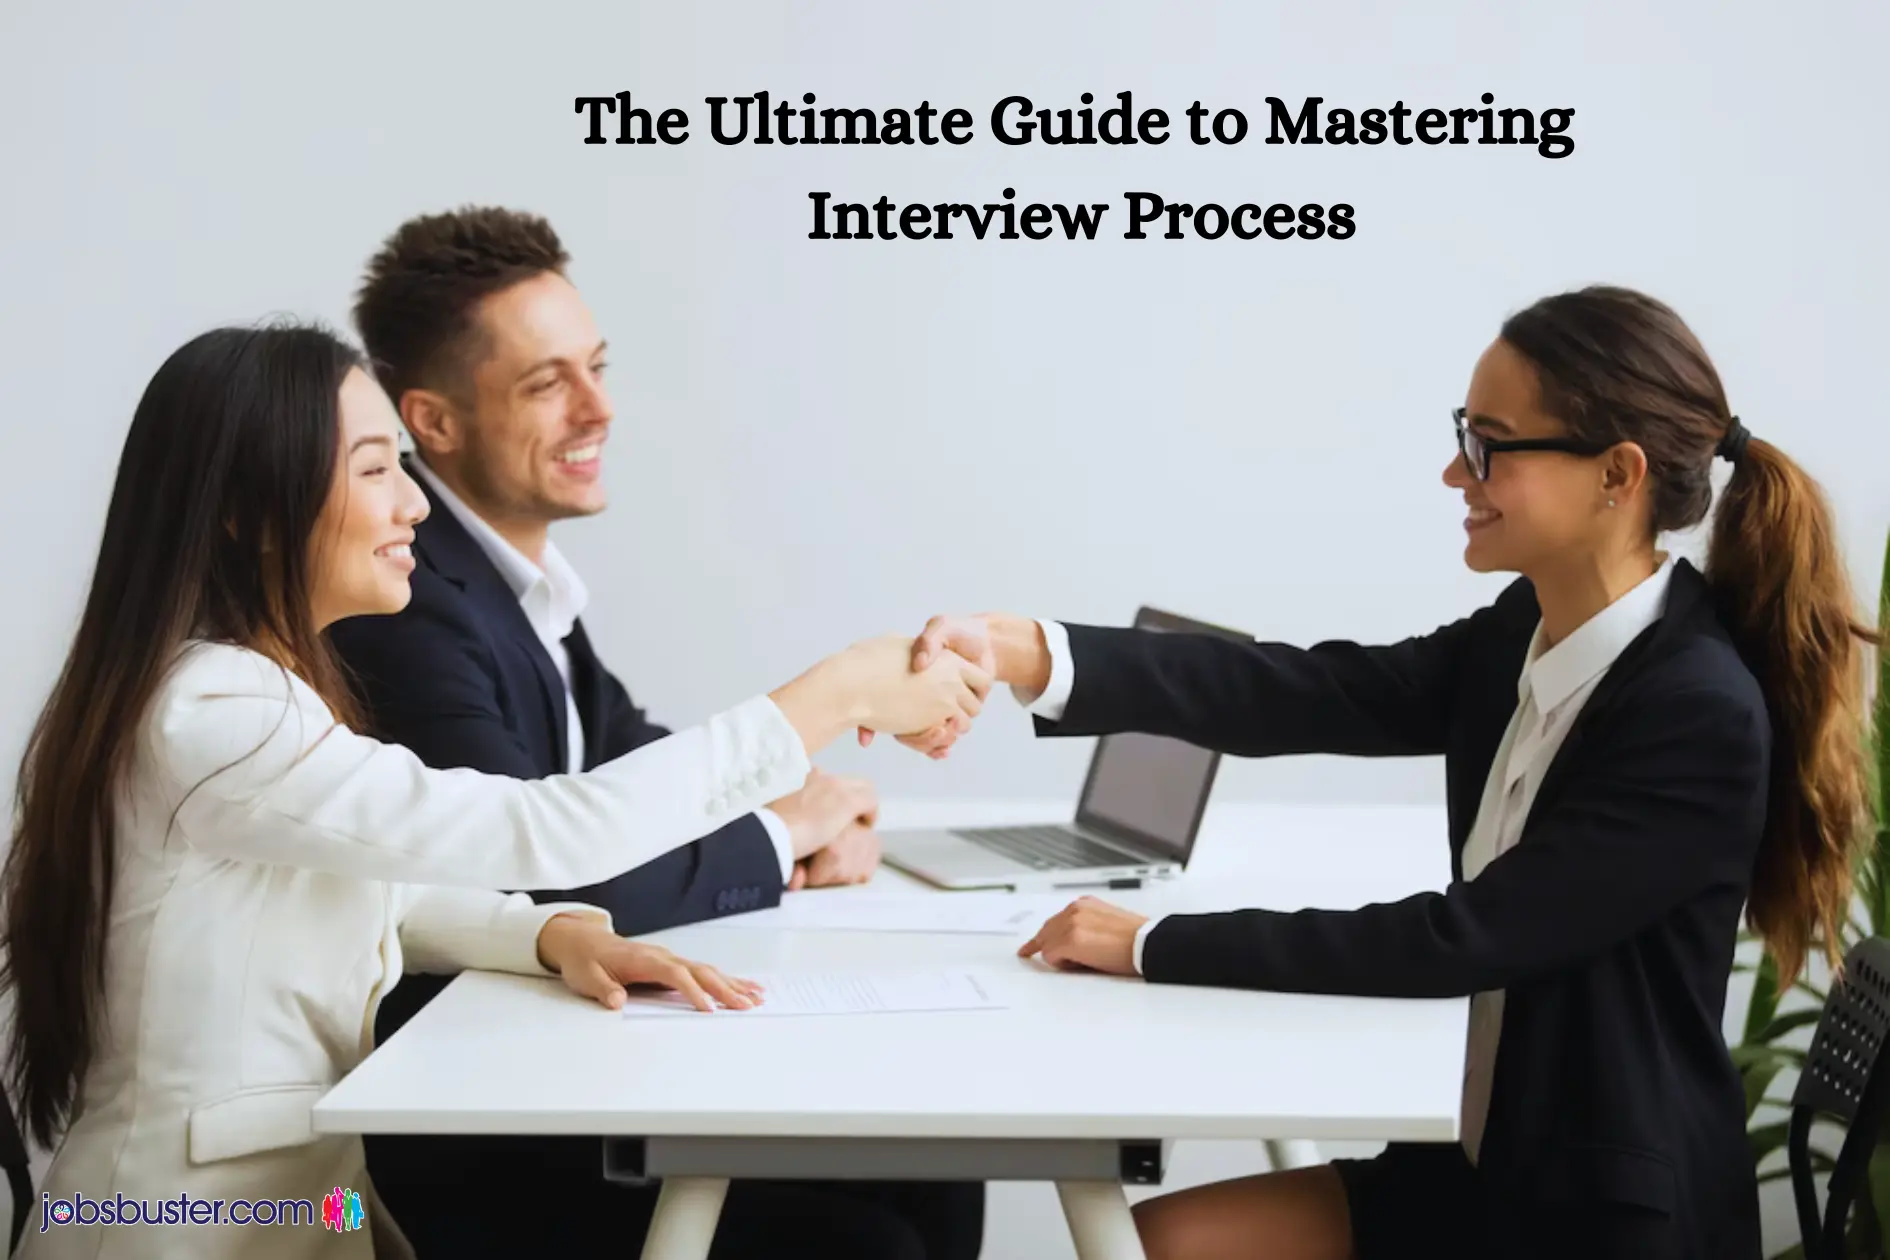 The Ultimate Guide to Mastering Interview Process